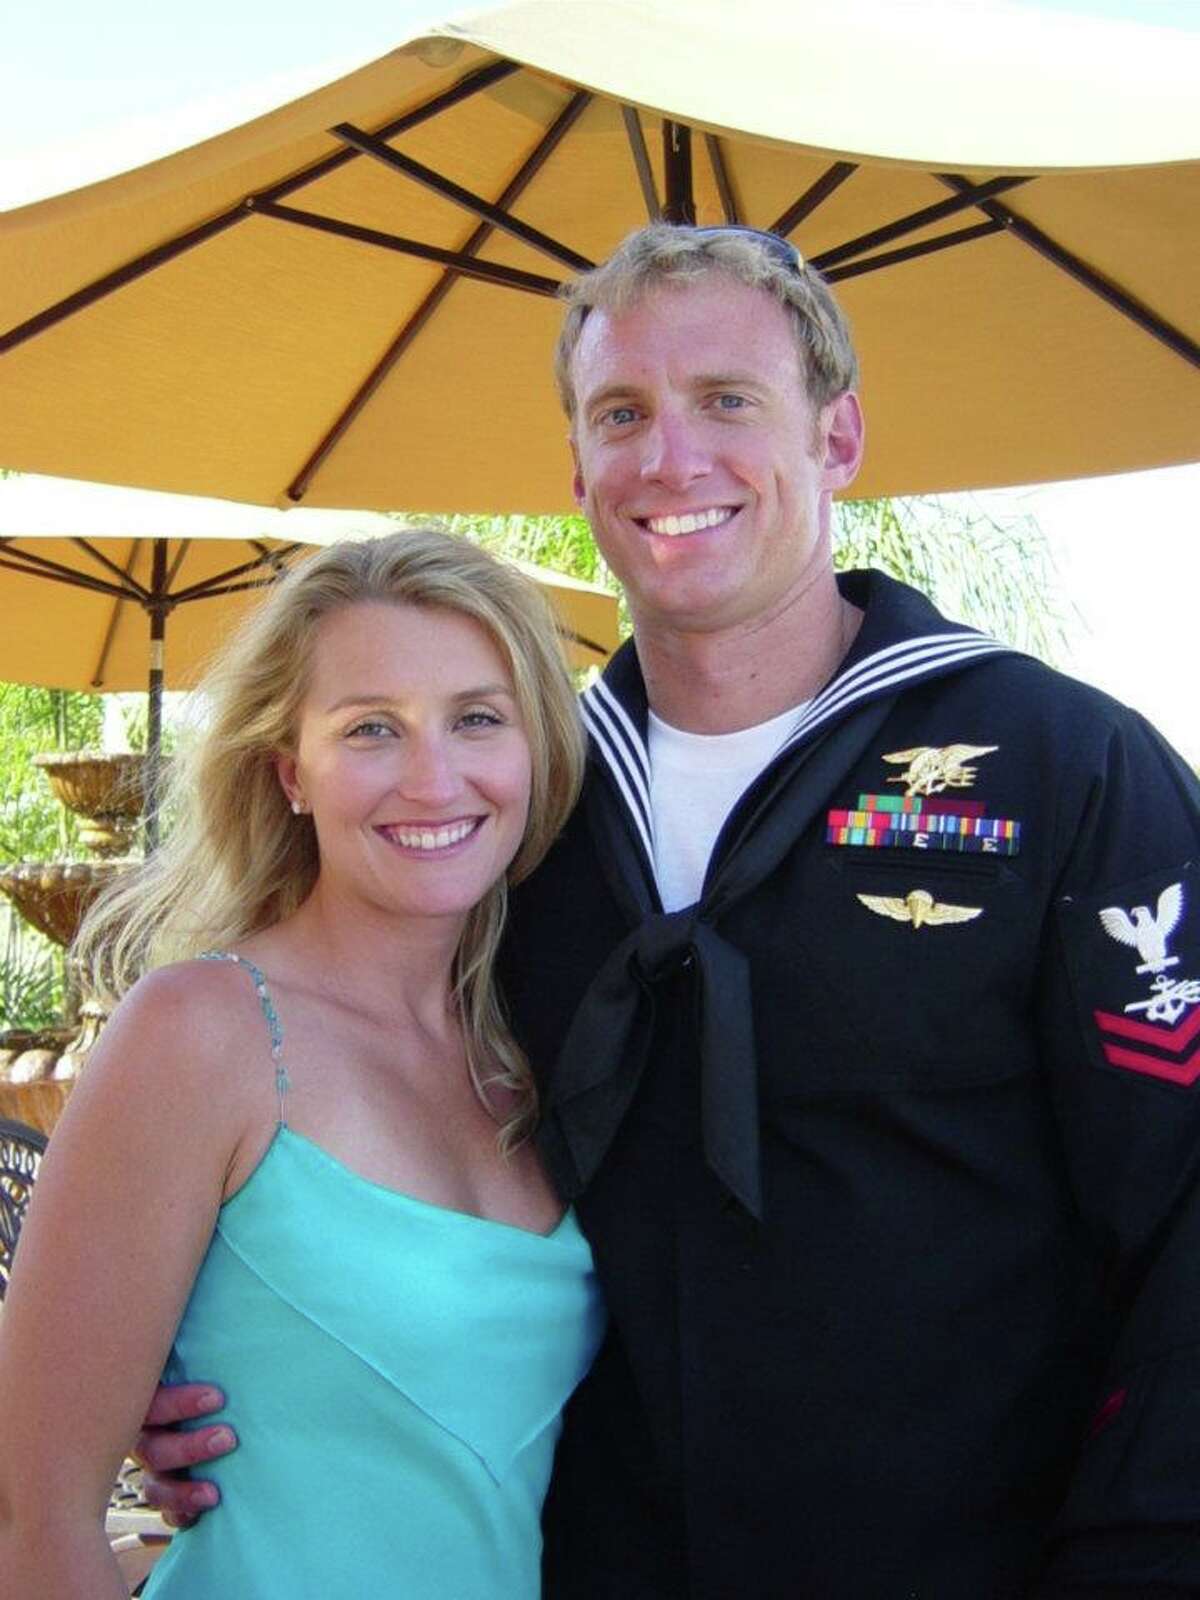 Navy SEAL widow searches for husbands ring on Facebook